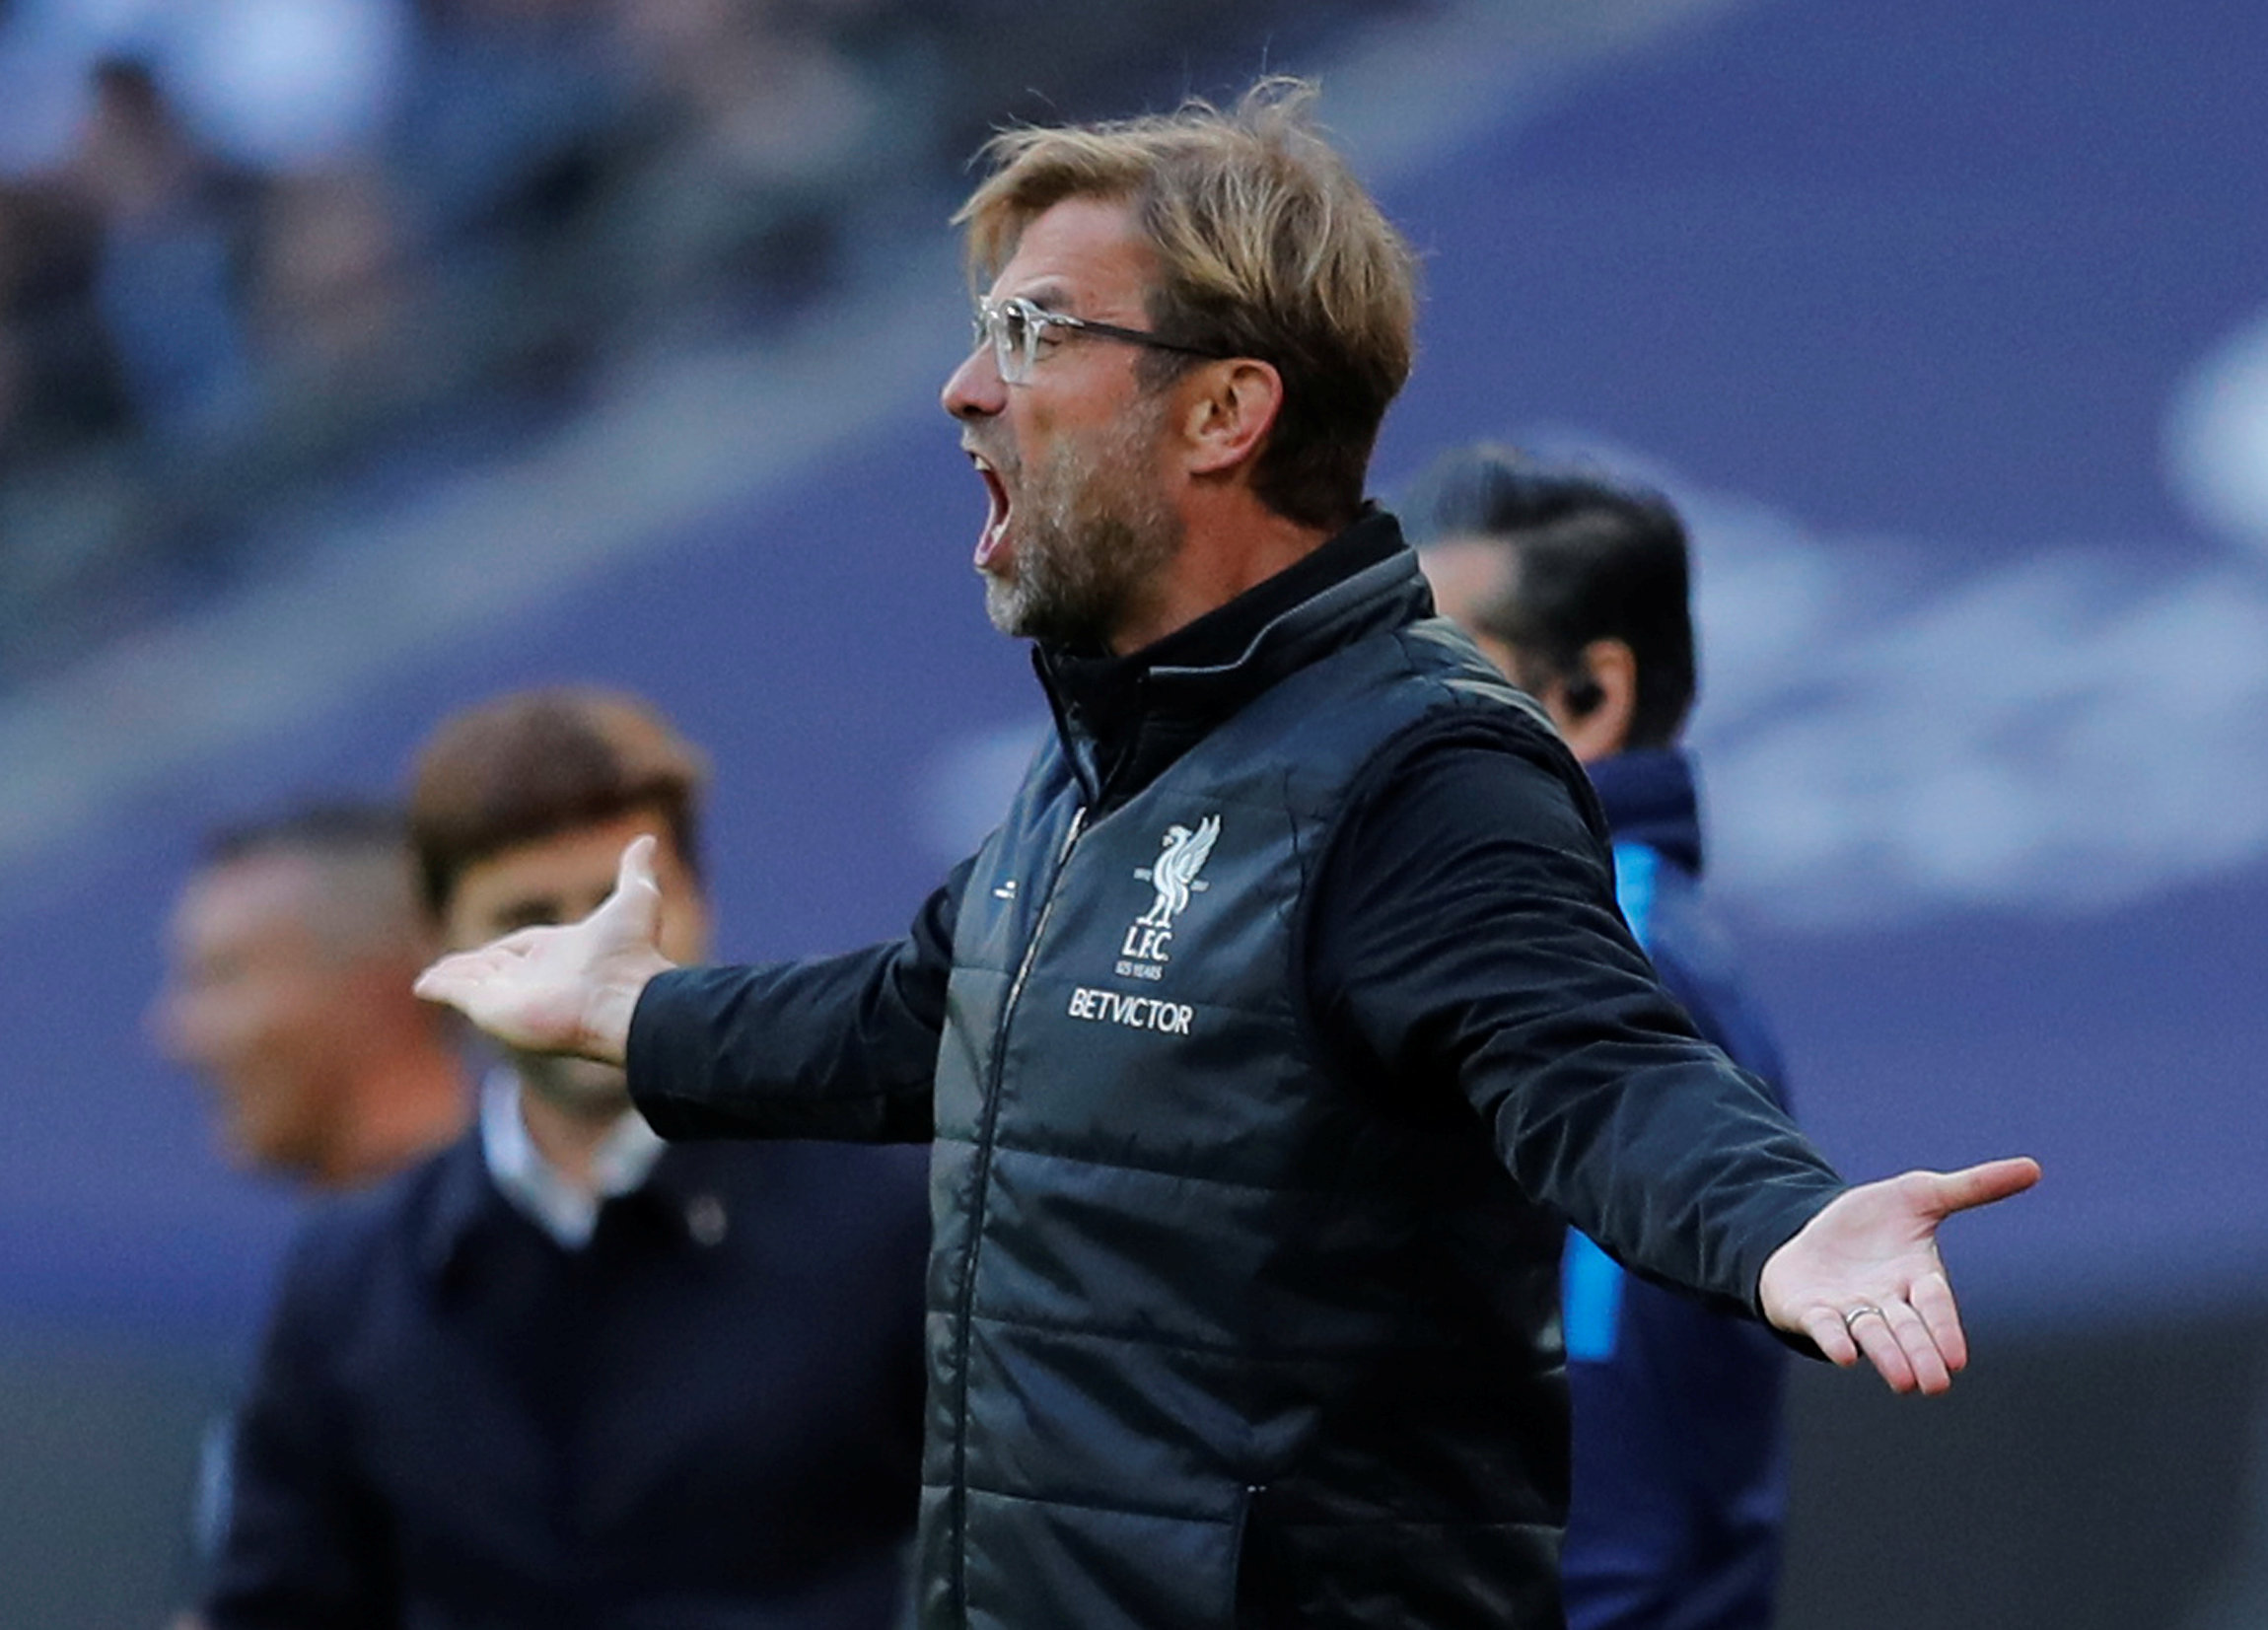 Football: Klopp must take blame for Liverpool's poor defence, says Schmeichel